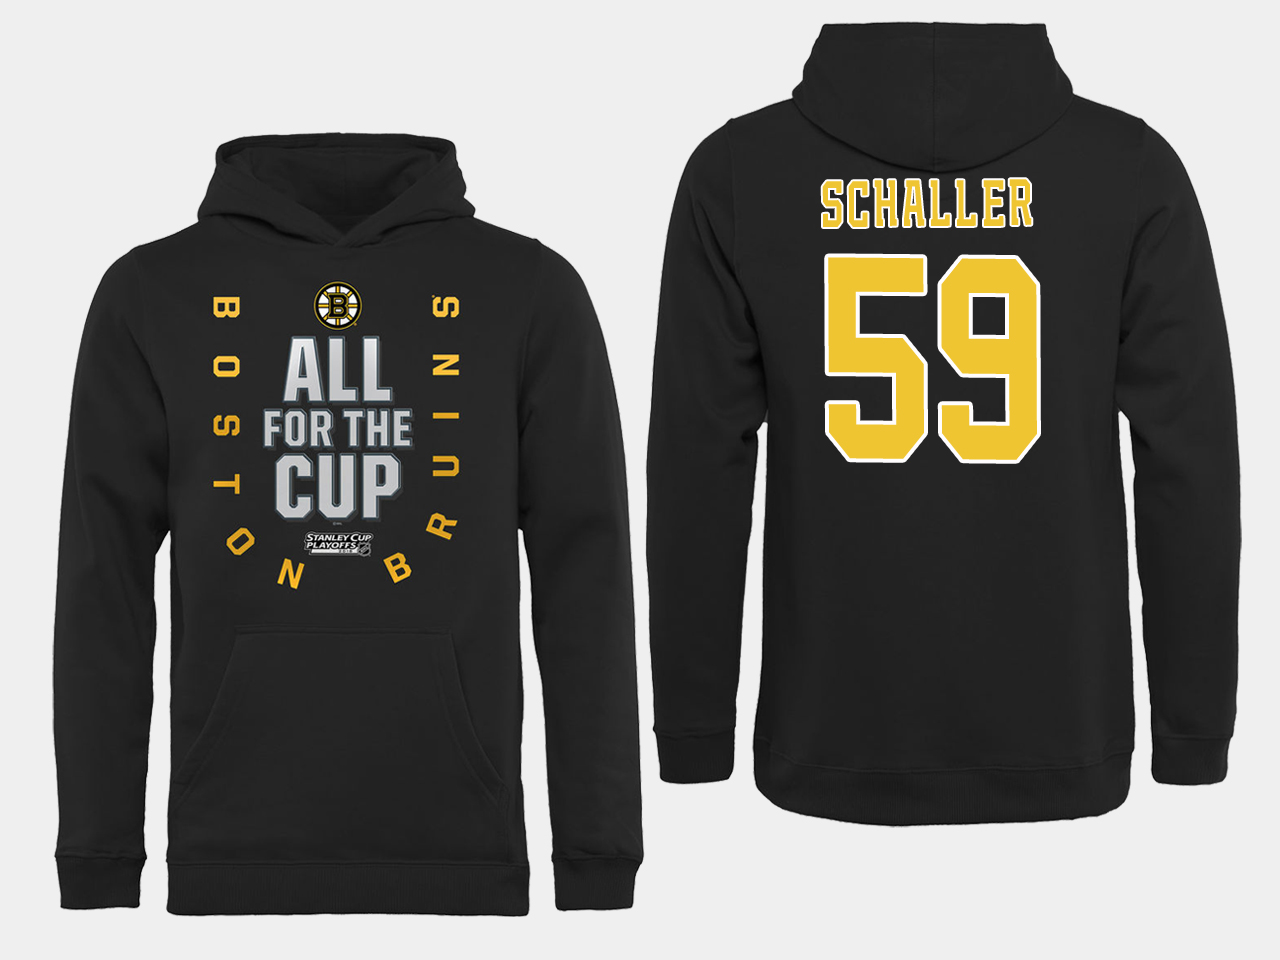 NHL Men Boston Bruins #59 Schaller Black All for the Cup Hoodie